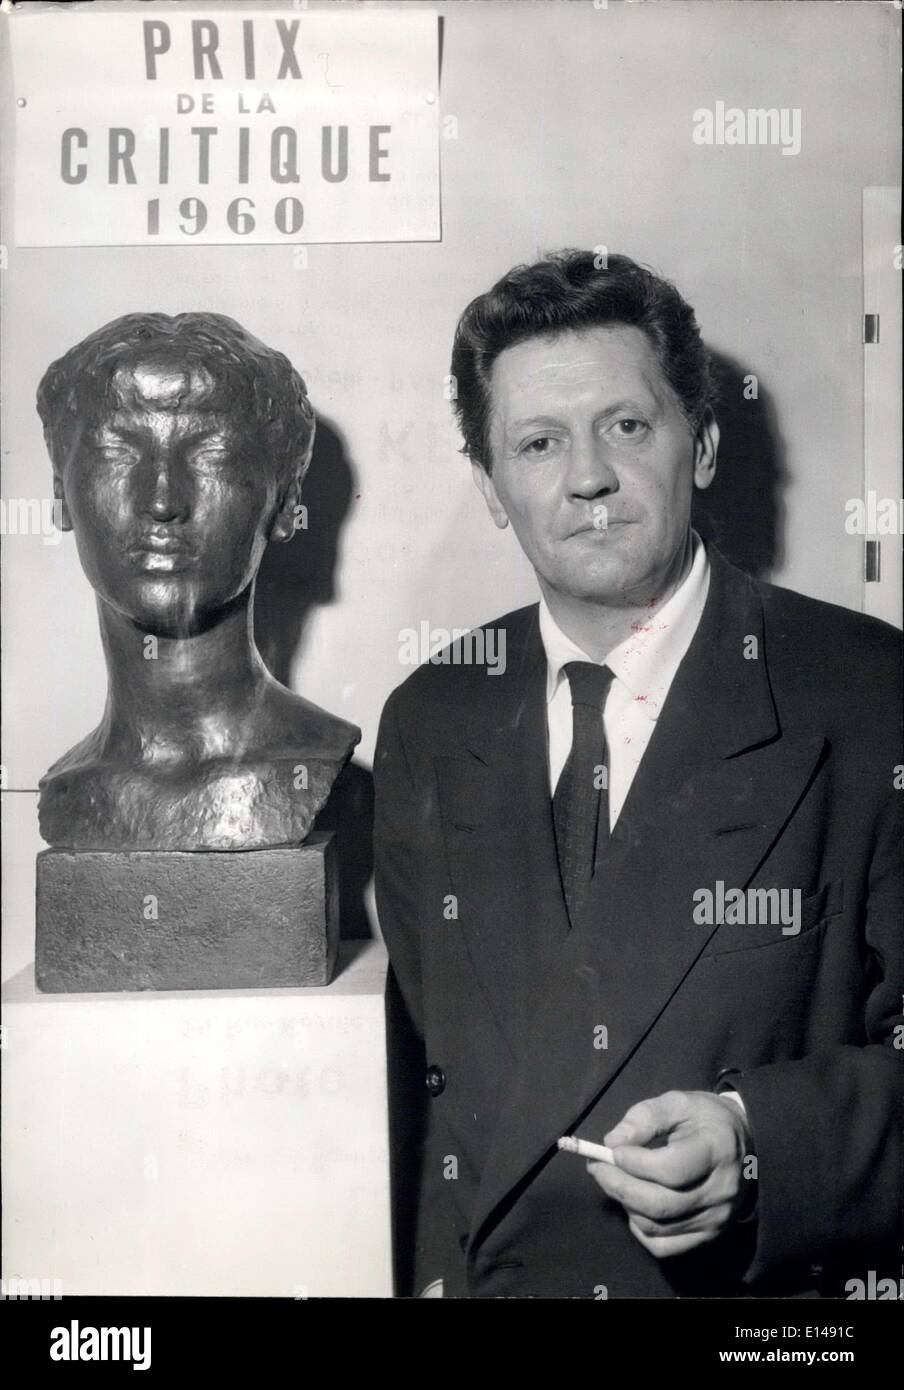 Apr. 17, 2012 - A Parisian Sculptor gets the 1960 critic price: The critic price which is generally awarded to a painter (The price was created 10 years ago and the first Laureate was famous painter Bernard Buffet) has been awarded to-day. Photo shows The Laureate of the 1960 price: 40 year old Parisian sculptor Jean Carton with one of his works. Stock Photo